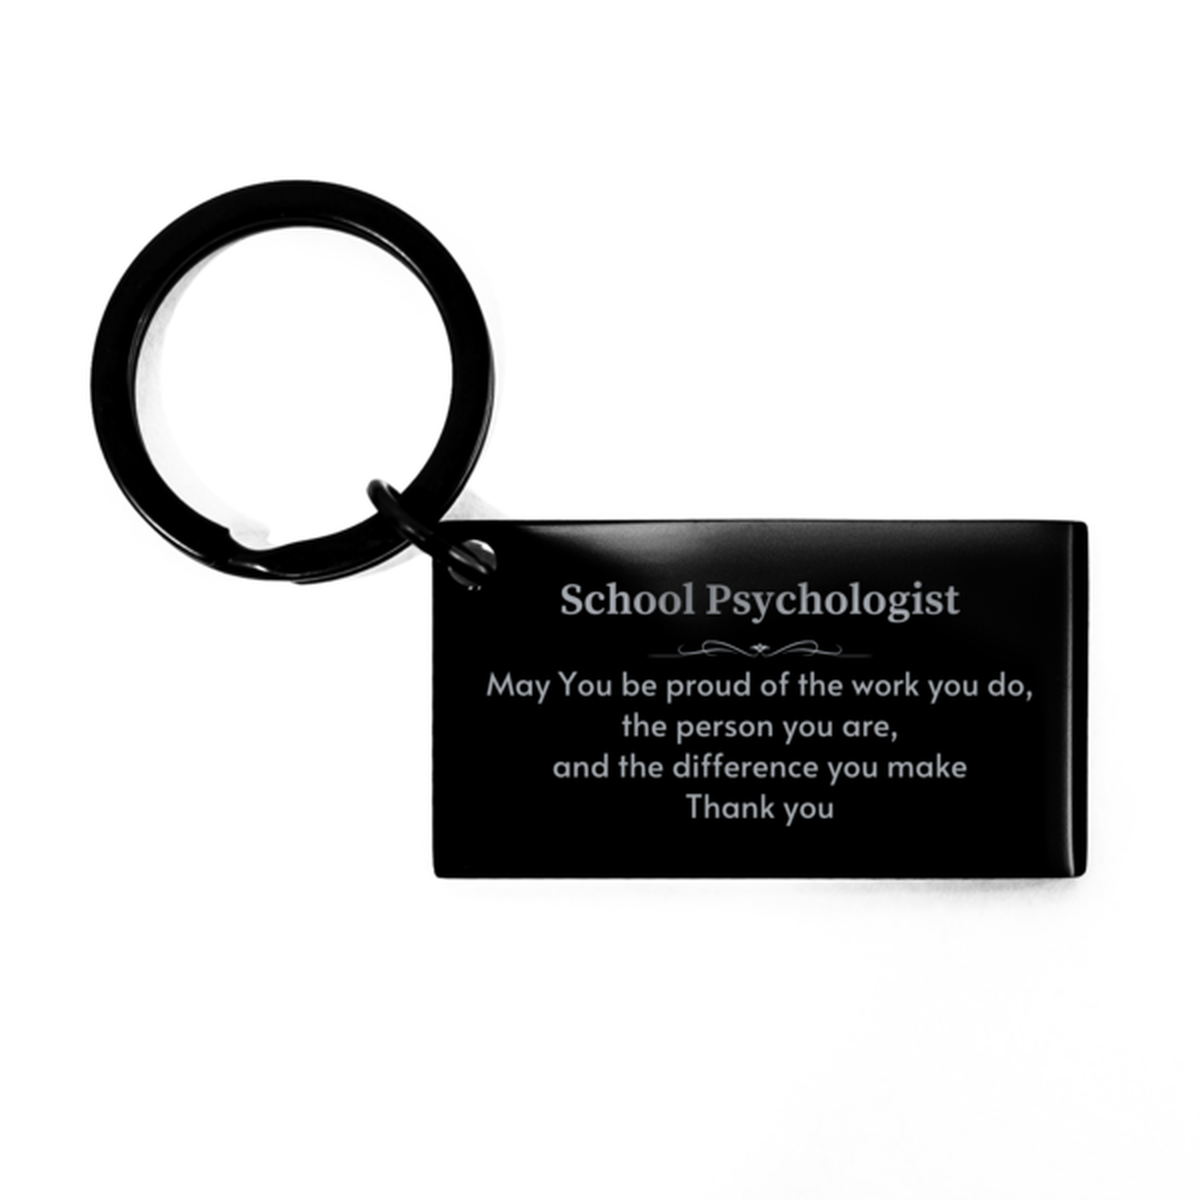 Heartwarming Keychain Retirement Coworkers Gifts for School Psychologist, Transcriptionist May You be proud of the work you do, the person you are Gifts for Boss Men Women Friends